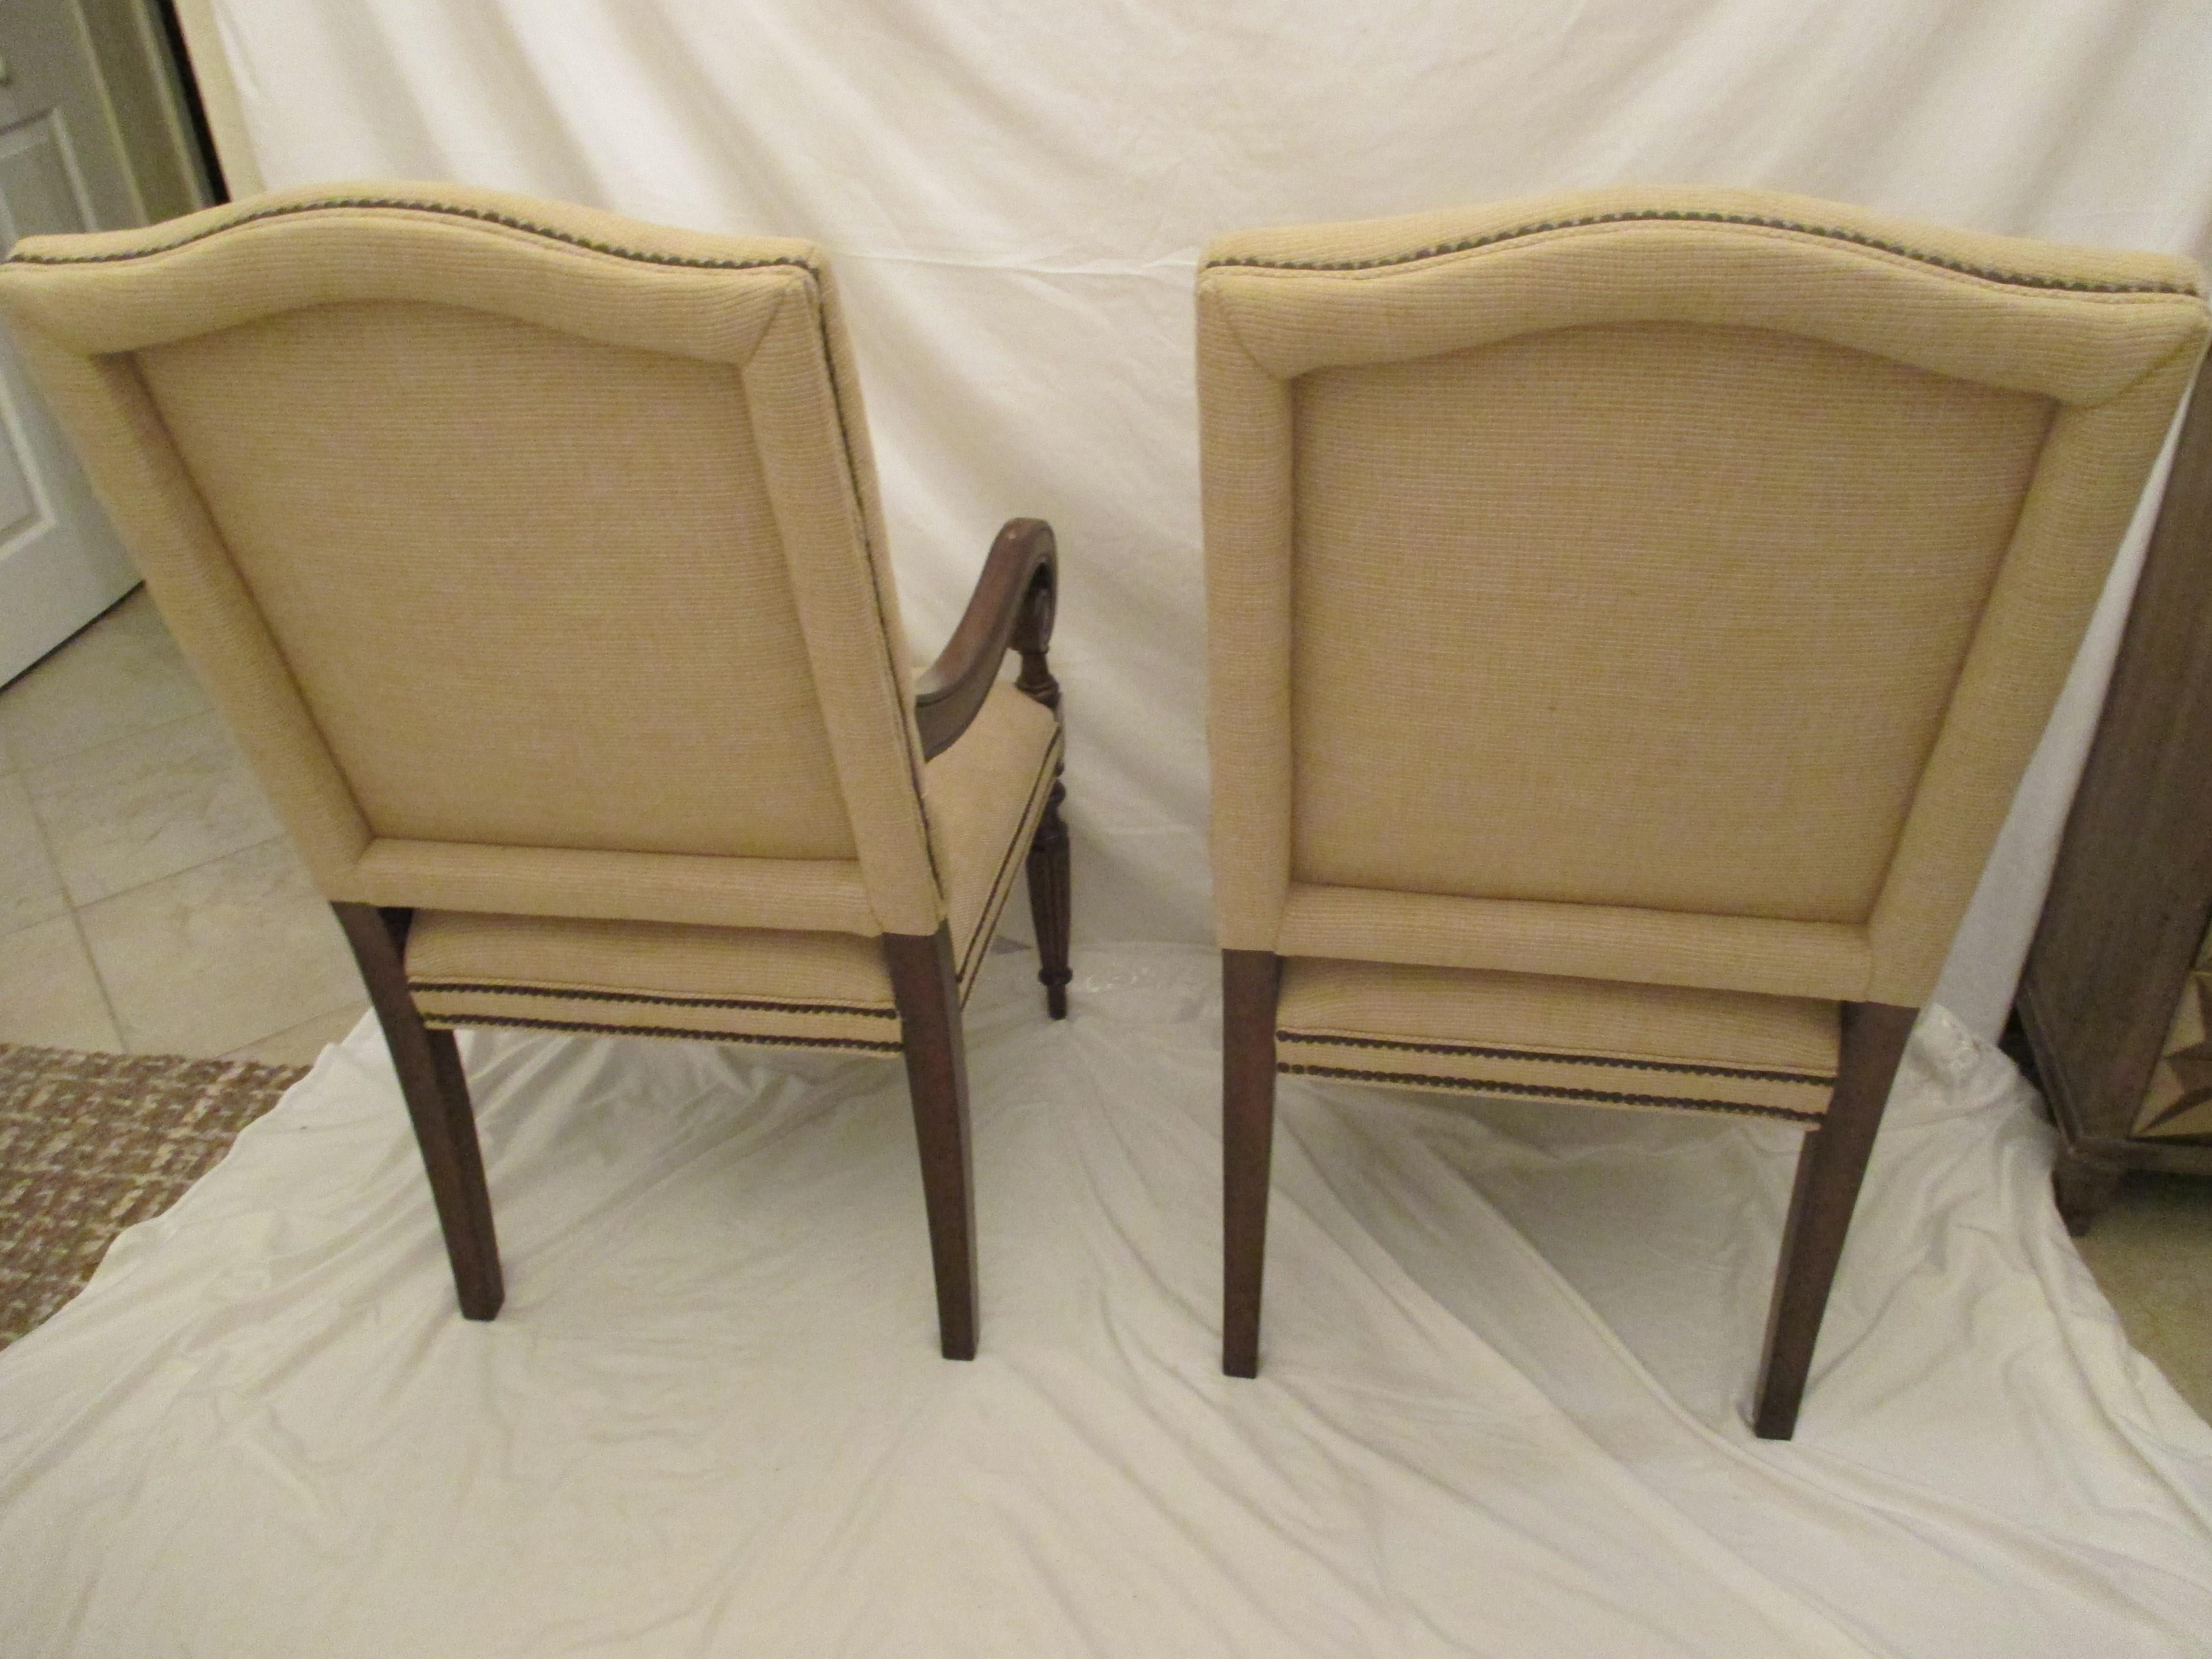 Rustic Pair of Upholstered Armchairs with Nailhead Trim For Sale